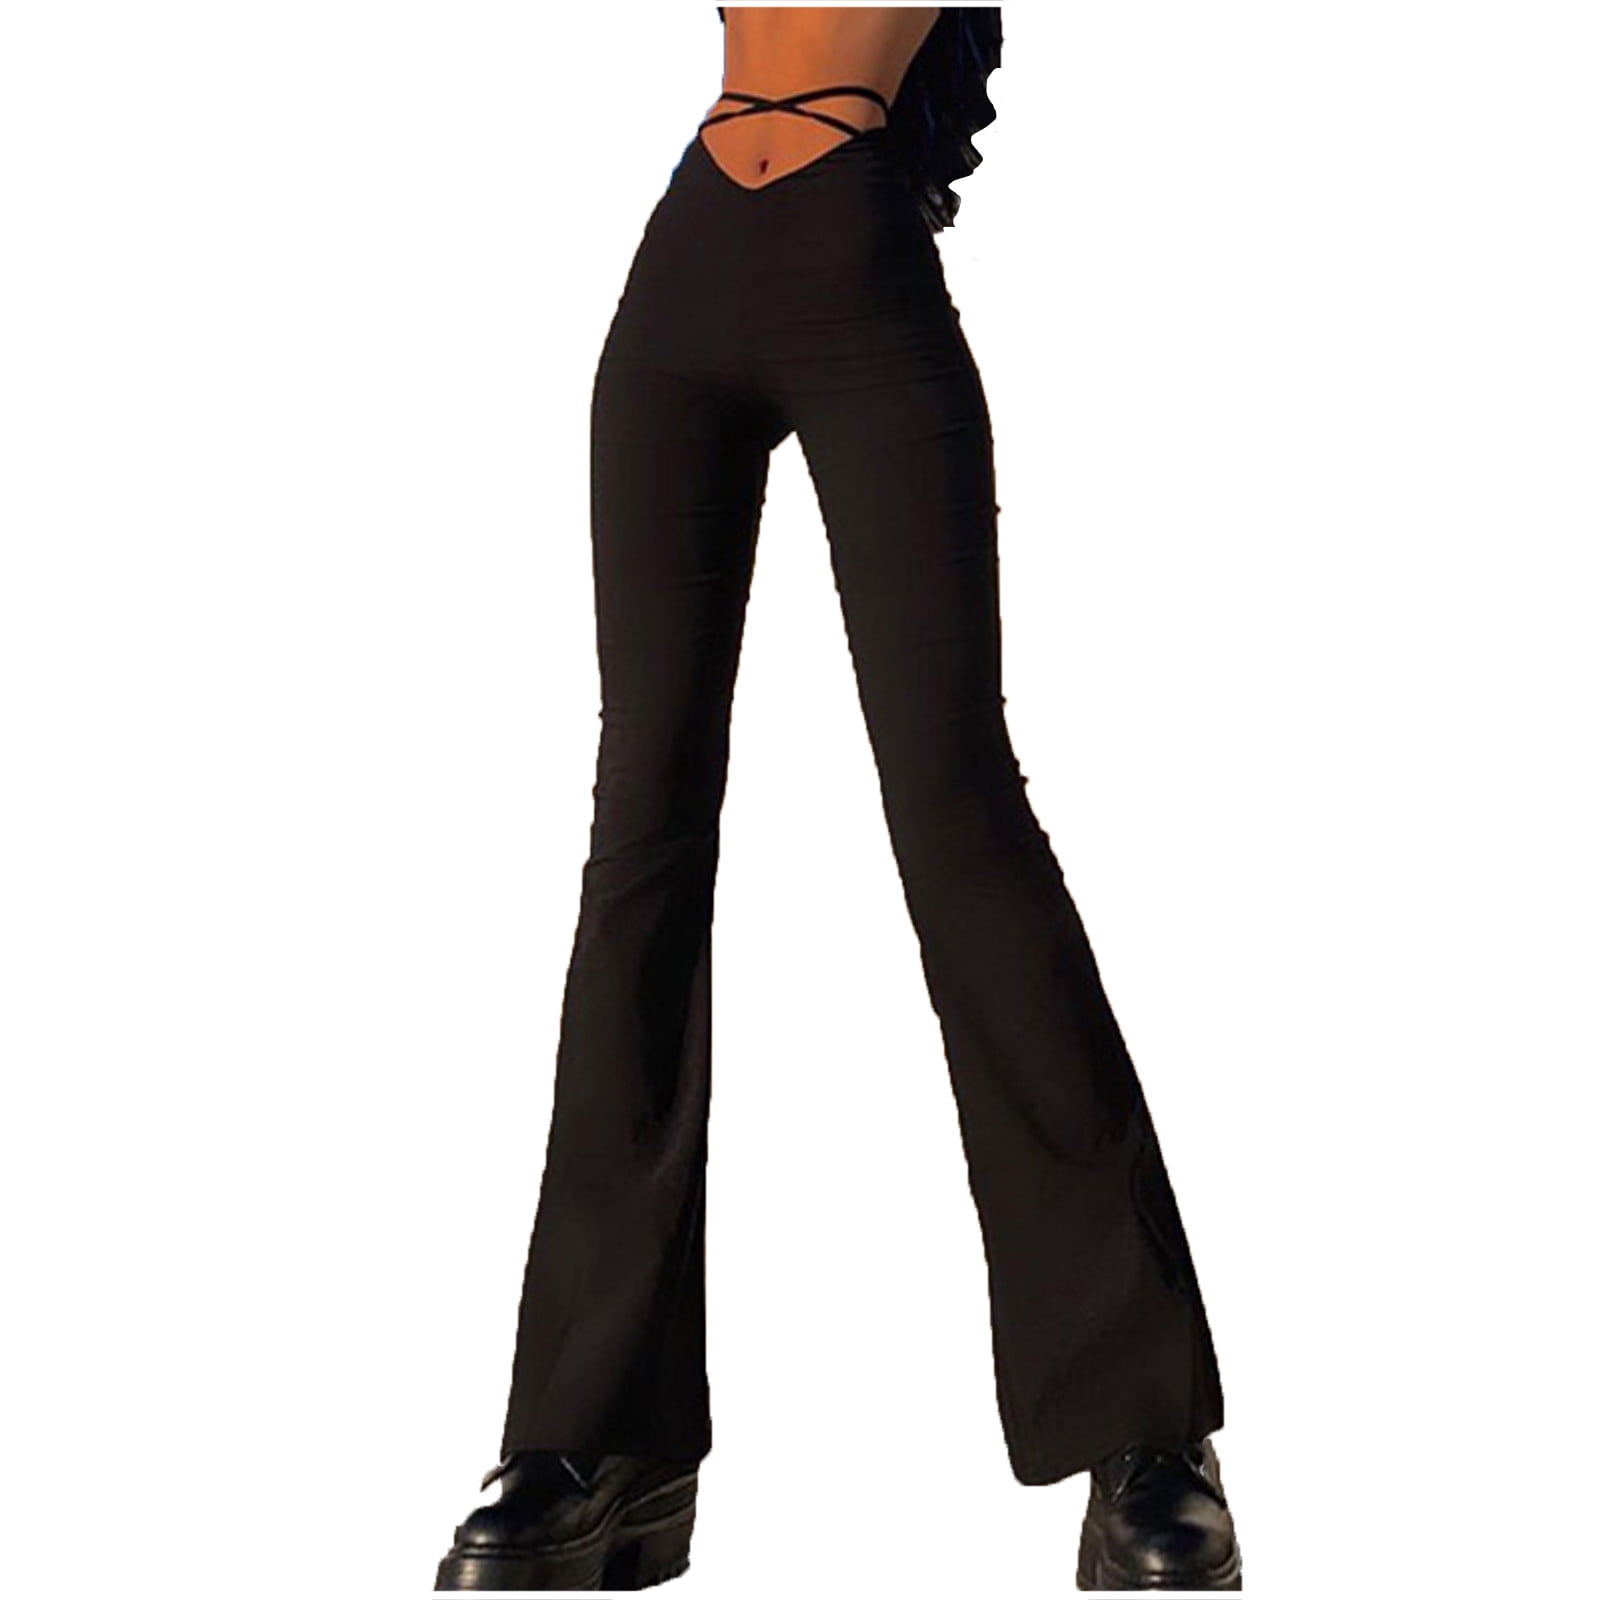 YYDGH Women's Cut Out Flare Pants V-Waisted Cropped Cross Elastic Stretch  Bell Bottom Trousers Solid Flared Lounge Pants Black L